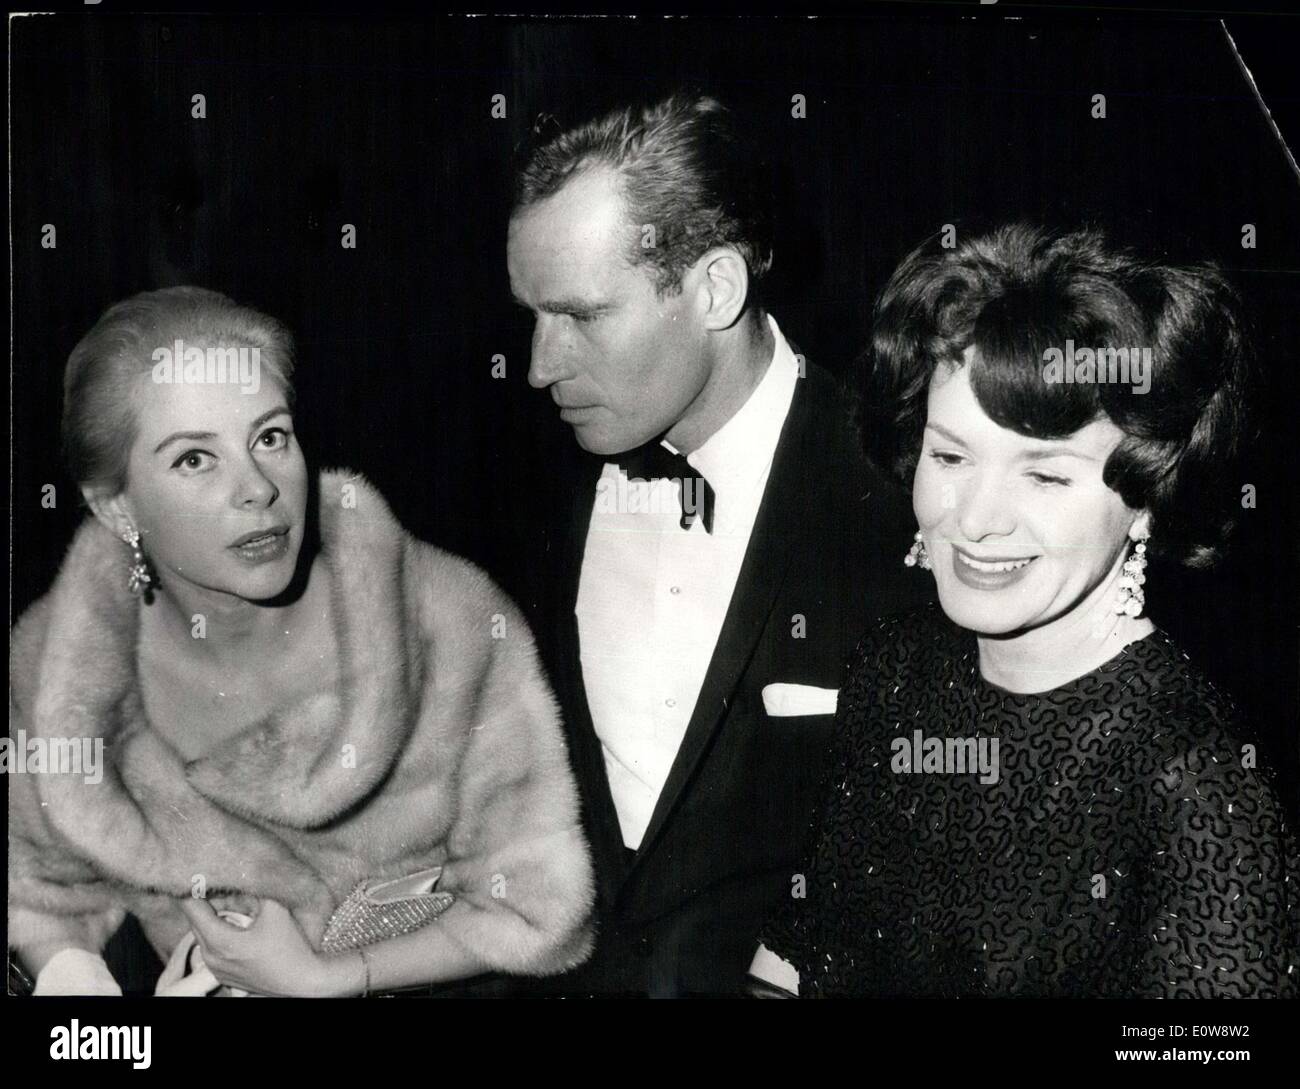 Dec. 09, 1961 - Charlton Heston at Paris premiere of ''EL CID'': charlton Heston and his wife attended the Paris premiere of ''EL CID'' last night. (Charlton Heston co-stars with Sophia Loren in the film). Charlton Heston pictured with his wife (right) and genevieve page (who impersonates a spanish princess in ''EL CIE' Stock Photo